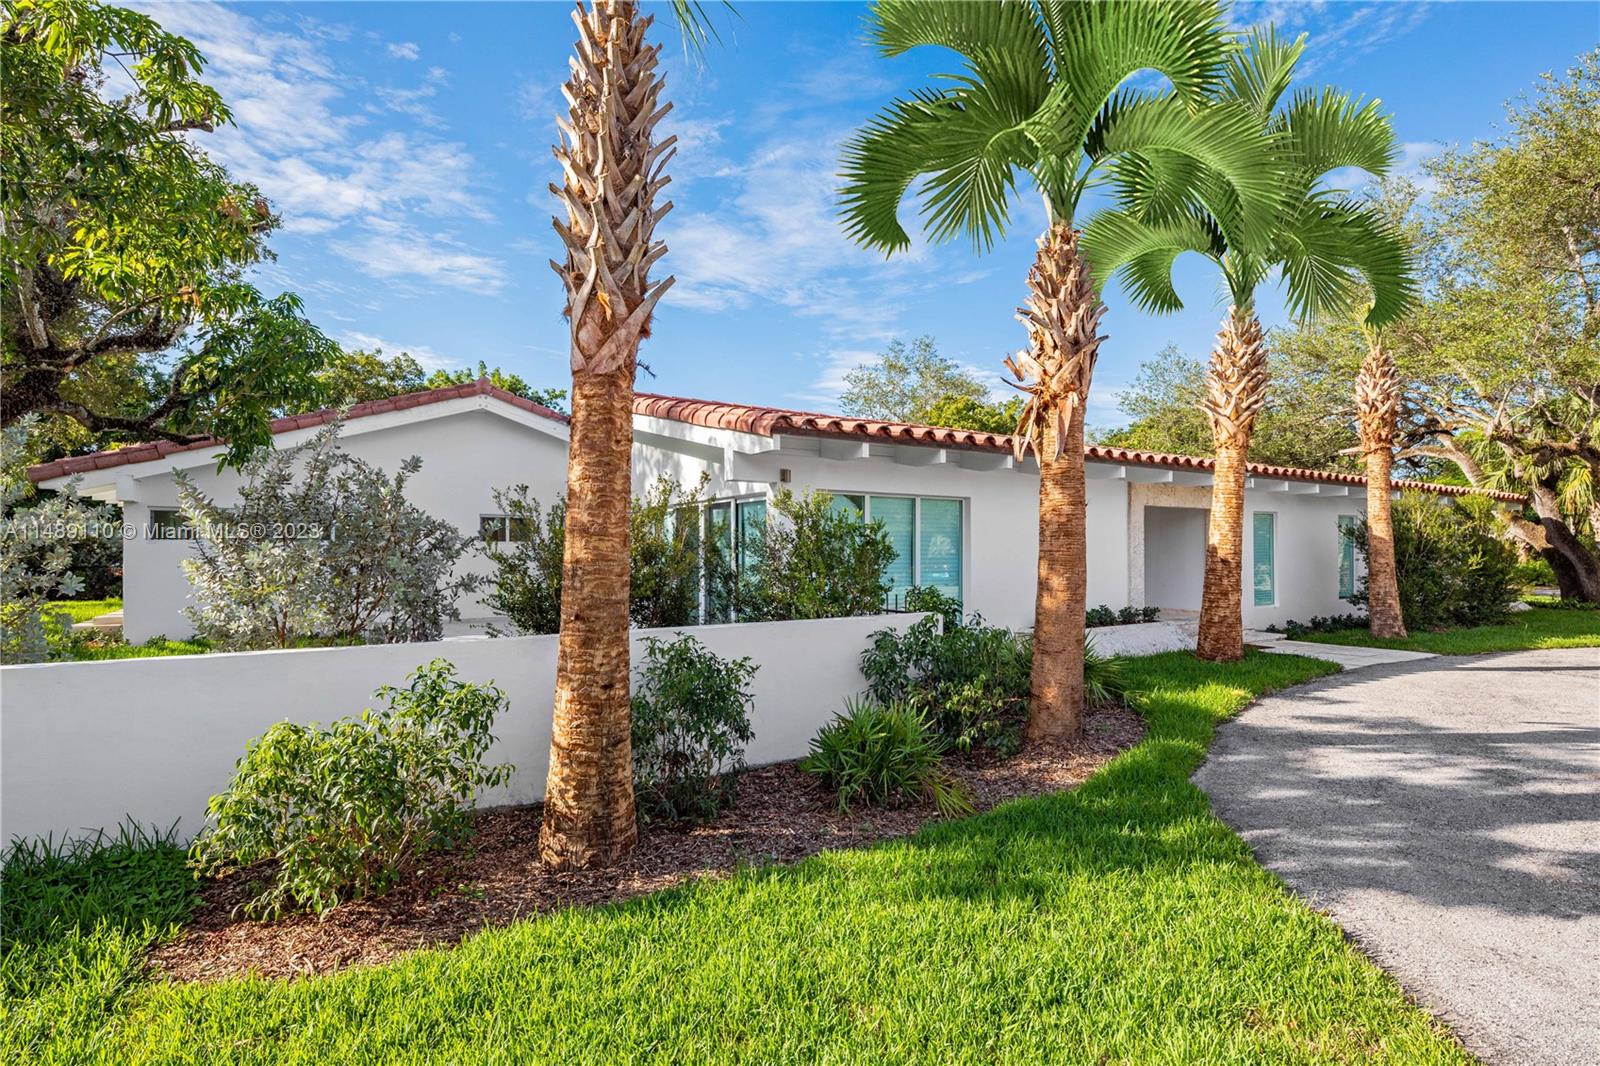 Rare opportunity to live in a turnkey centrally located home in the heart of Coral Gables. This fully remodeled 5 bedroom, 4.5 bath home exudes contemporary living charm in a 3,942 sq ft home on a 37,810 sq ft lot. Features include classic white exposed beams, volume ceilings, wraparound impact doors and windows, and an abundance of natural light. The spacious kitchen comes with a breakfast nook, smart appliances, laundry room, custom built-ins, and porcelain tile flooring. A two-car carport and two separate driveways provide ample parking. The lushly landscaped outdoor space is the perfect place to relax, with grand mature oak trees lining the property and a private courtyard offering a Zen-like retreat experience.